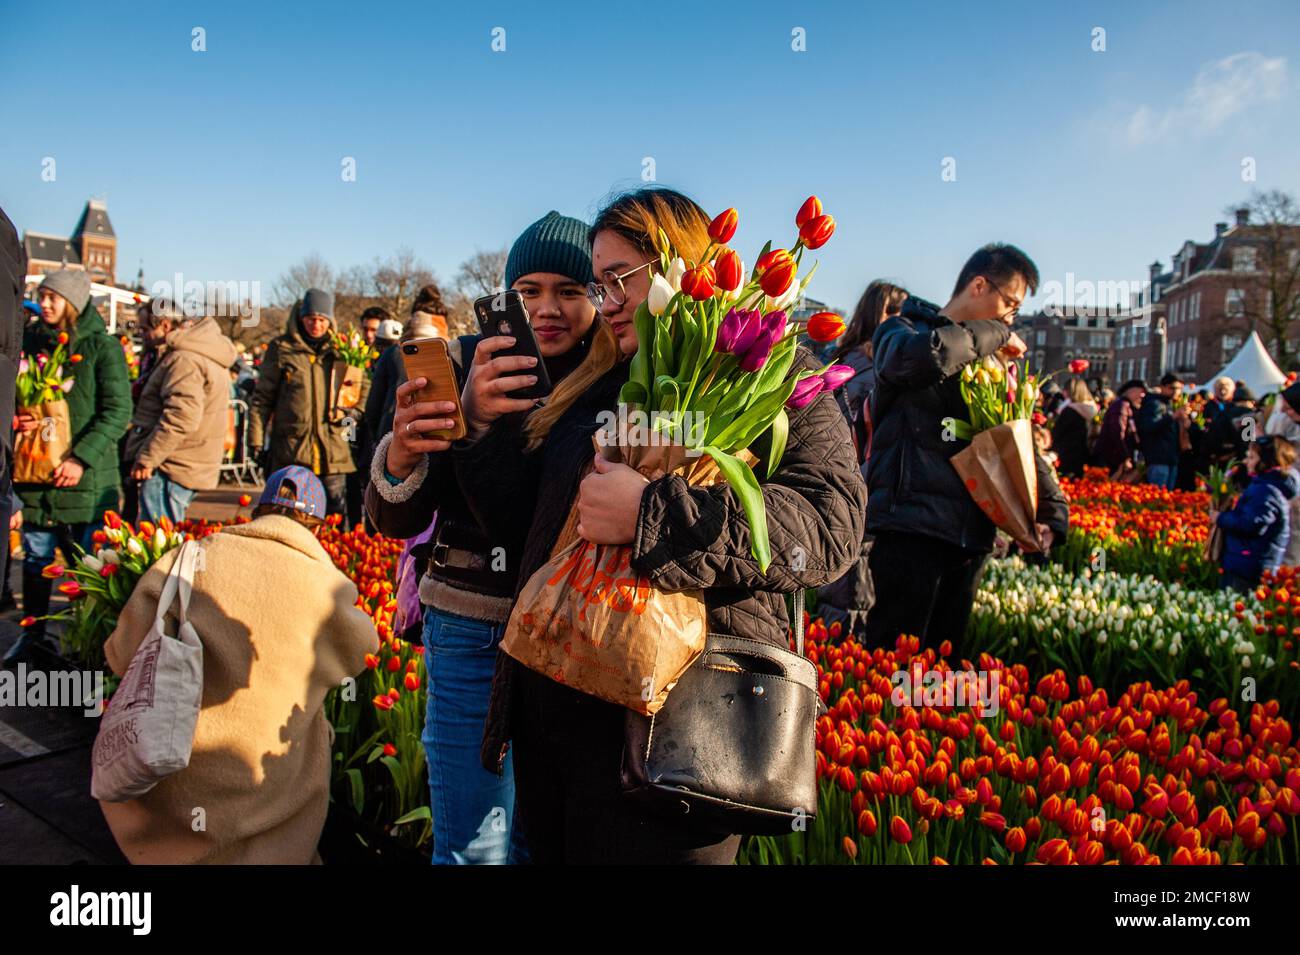 Two women are seen taking a selfie with their tulips. Each year on the 3rd Saturday of January, the National Tulip Day is celebrated in Amsterdam. Dutch tulip growers built a huge picking garden with more than 200,000 colorful tulips at the Museumplein in Amsterdam. Visitors are allowed to pick tulips for free. The event was opened by Olympic skating champion, Irene Schouten. Prior to the opening, she christened a new tulip: Tulipa 'Dutch Pearl' as a reference to the world - famous painting 'The girl with a pearl earring' by Johannes Vermeer. (Photo by Ana Fernandez/SOPA Images/Sipa USA) Stock Photo